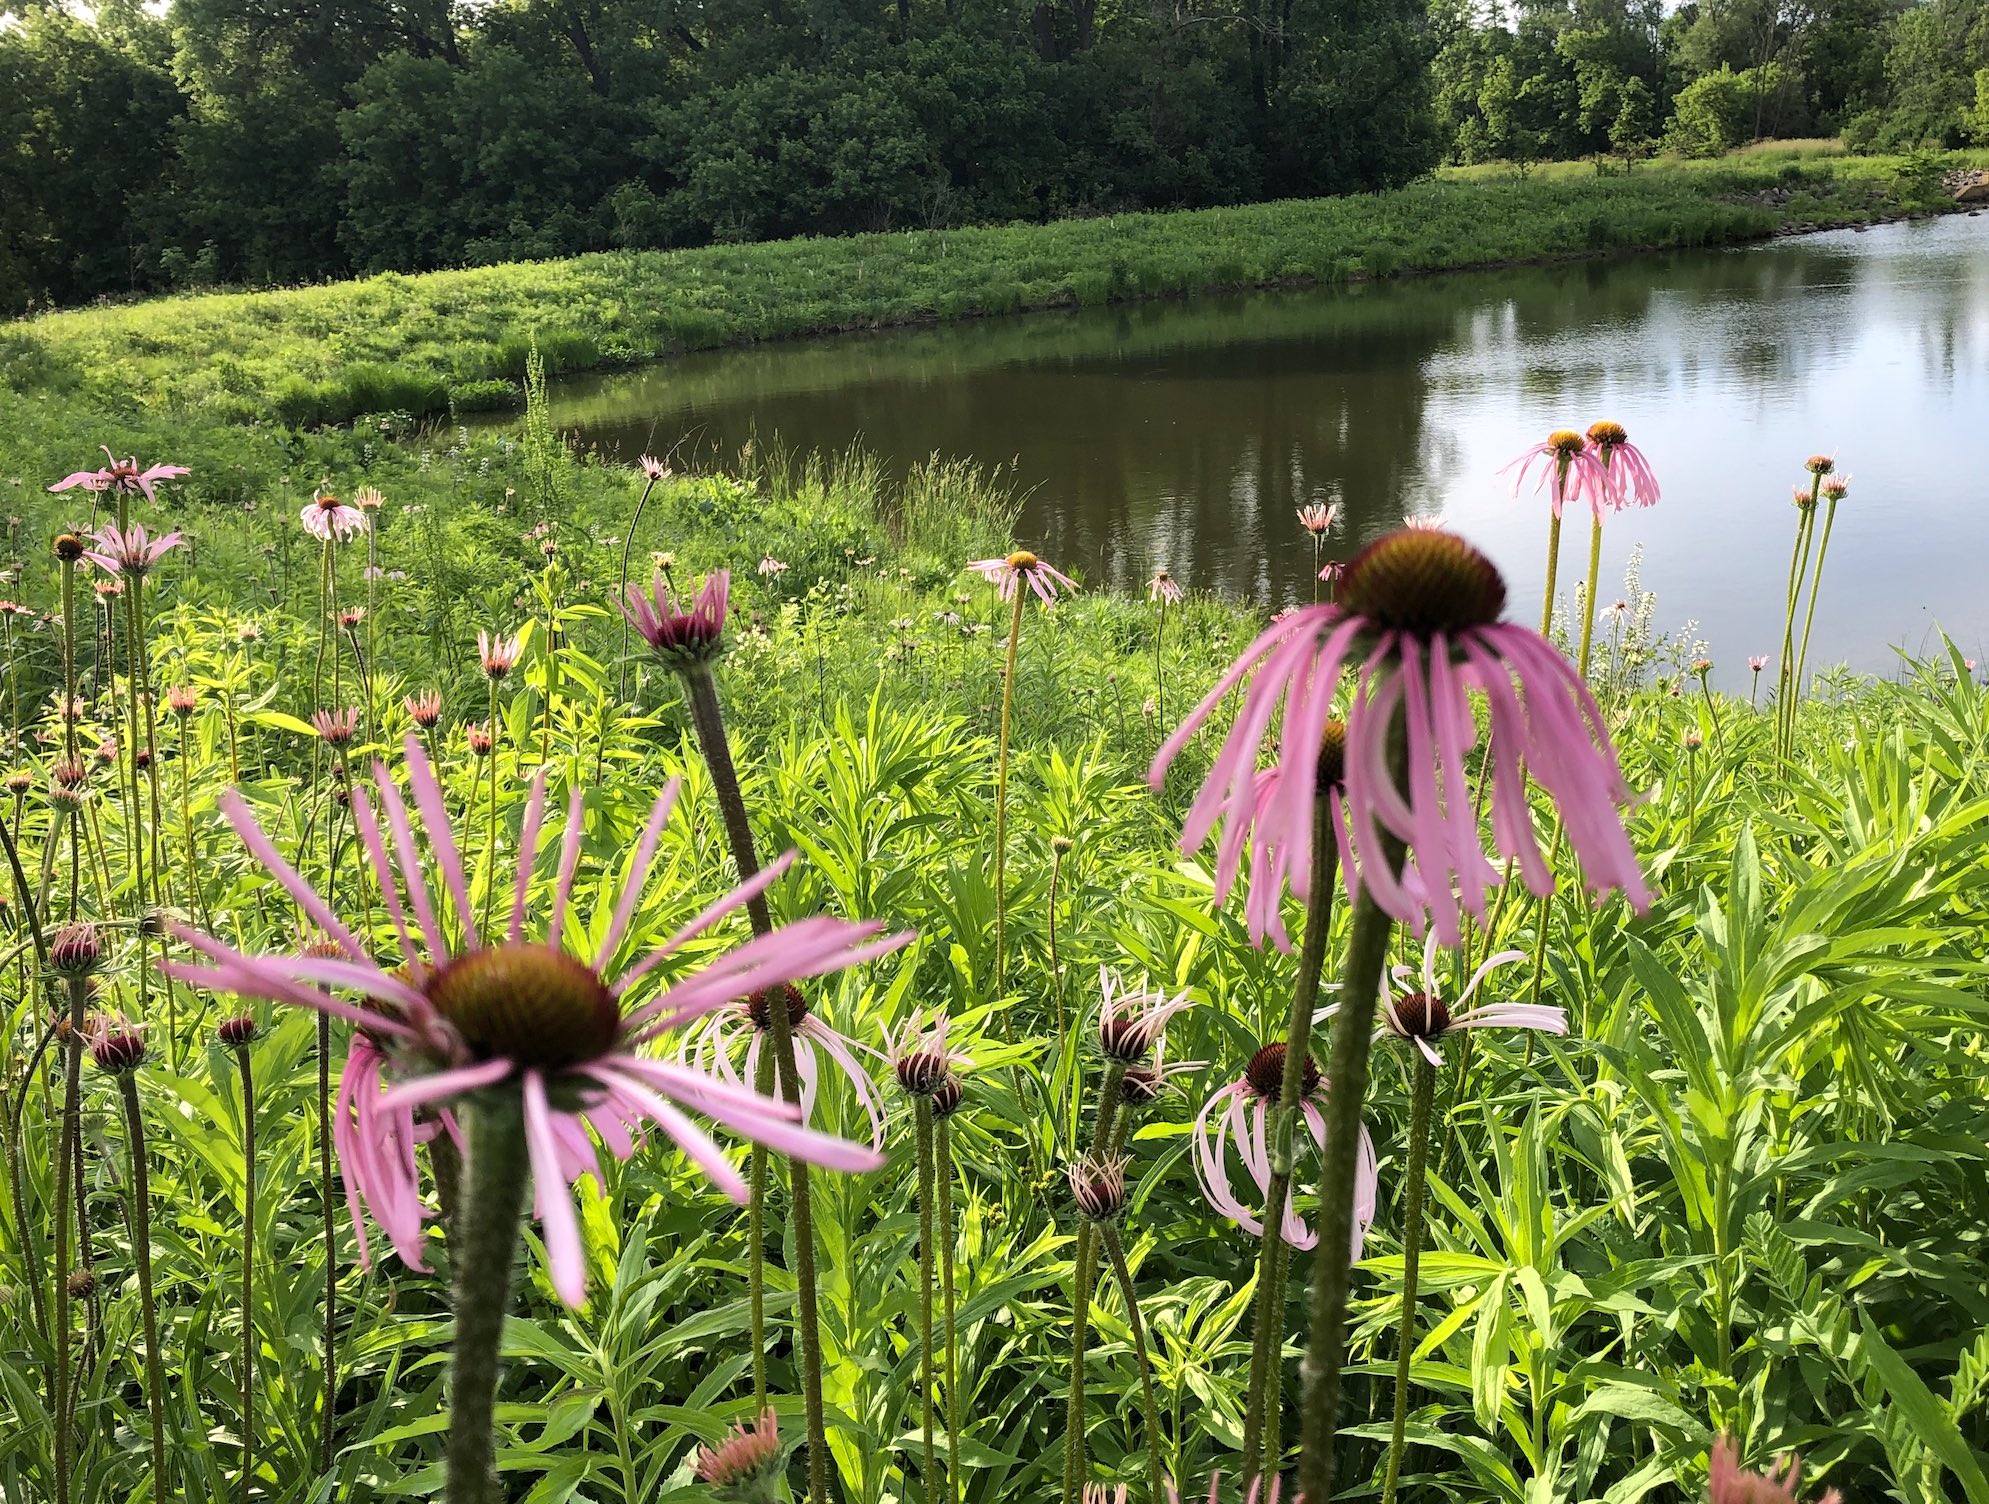 Pale purple coneflower on bank of Retaining Pond on corner of Nakoma Road and Manitou Way on June 20, 2019.